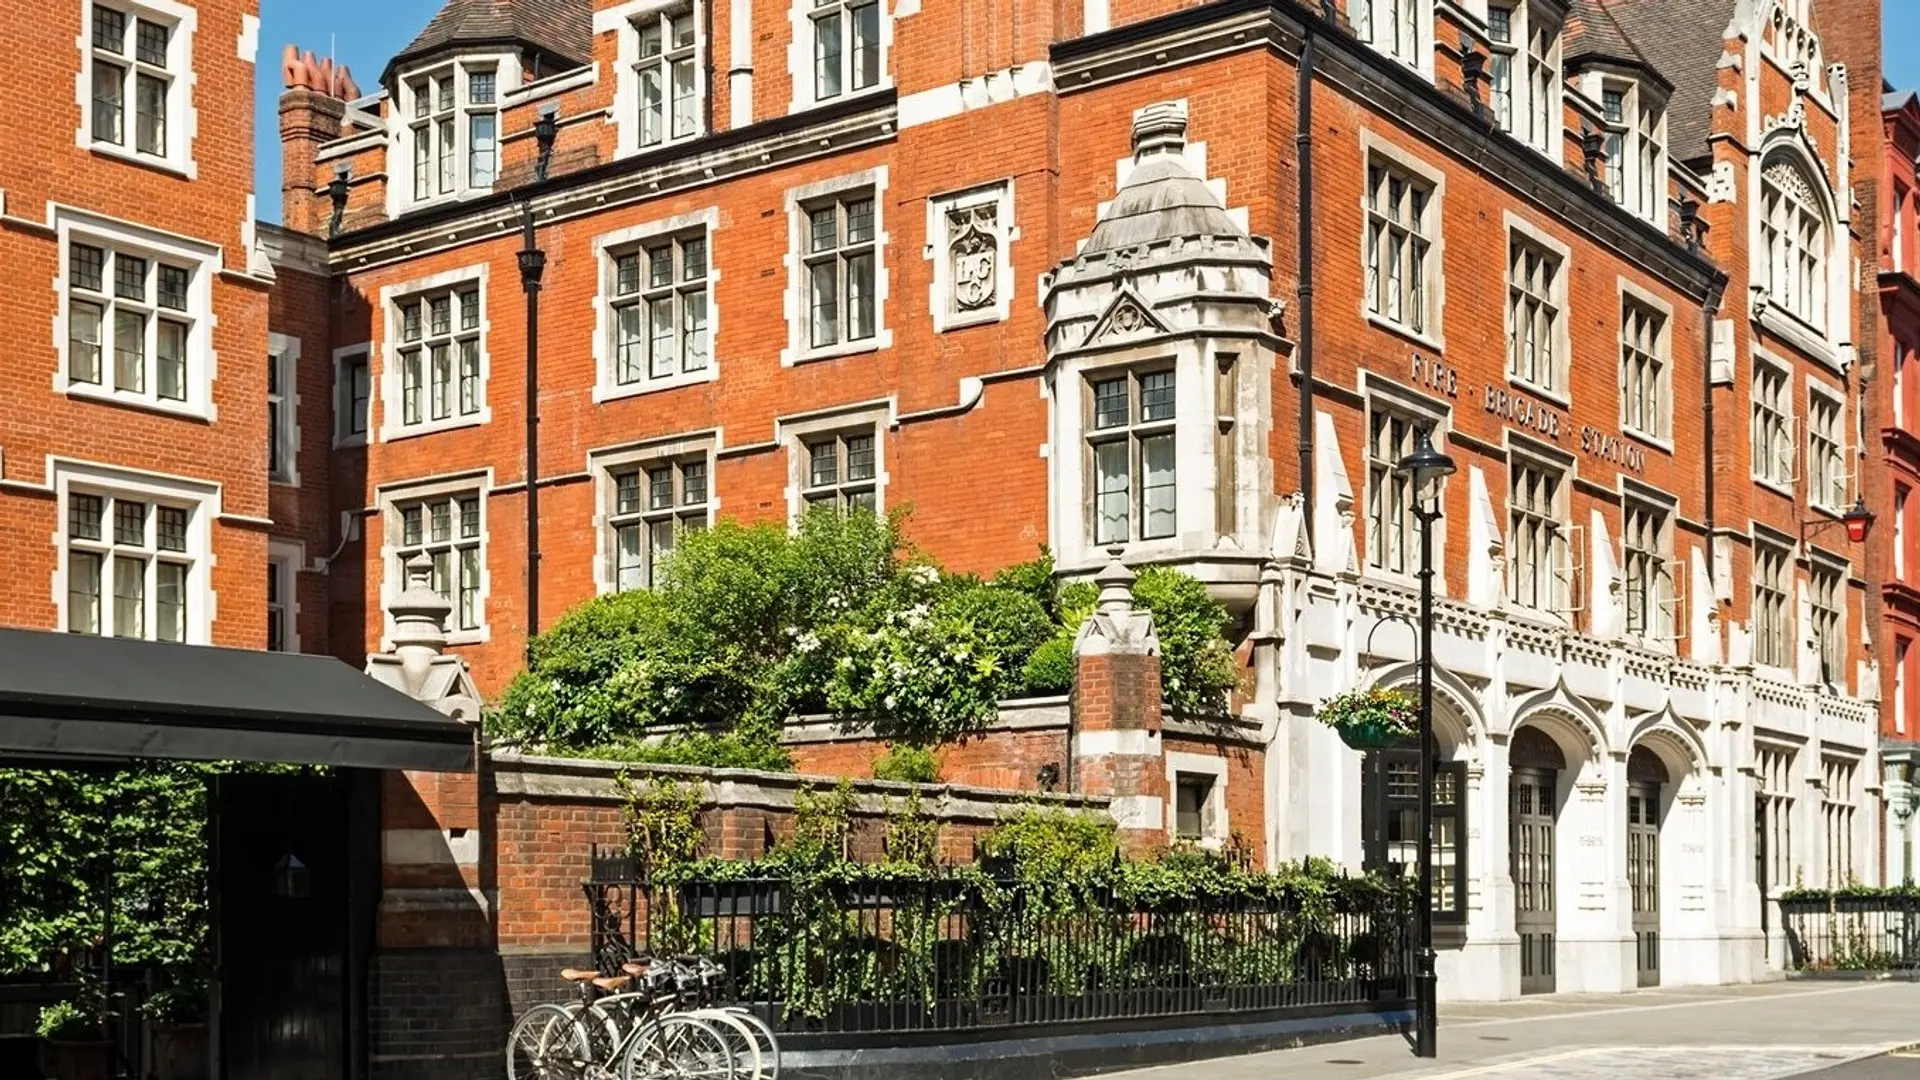 Chiltern Firehouse is one of the best restaurants in london